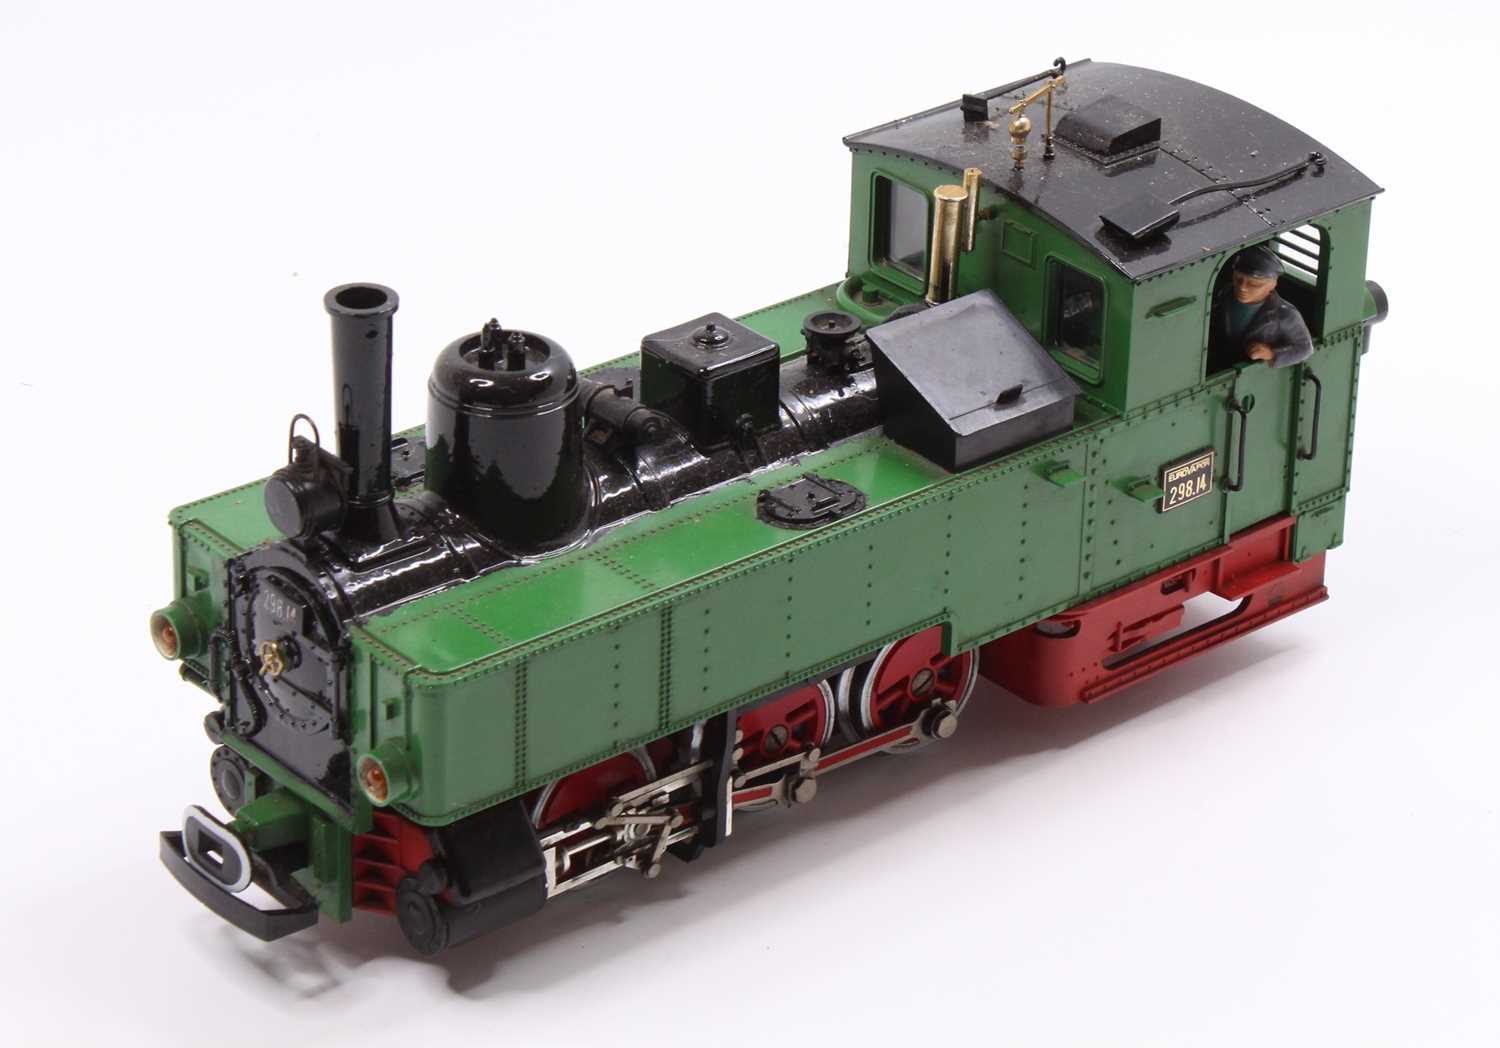 LGB no. 2073 0-6-2 loco running no. 298.14, red chassis green cab, model has been overpainted